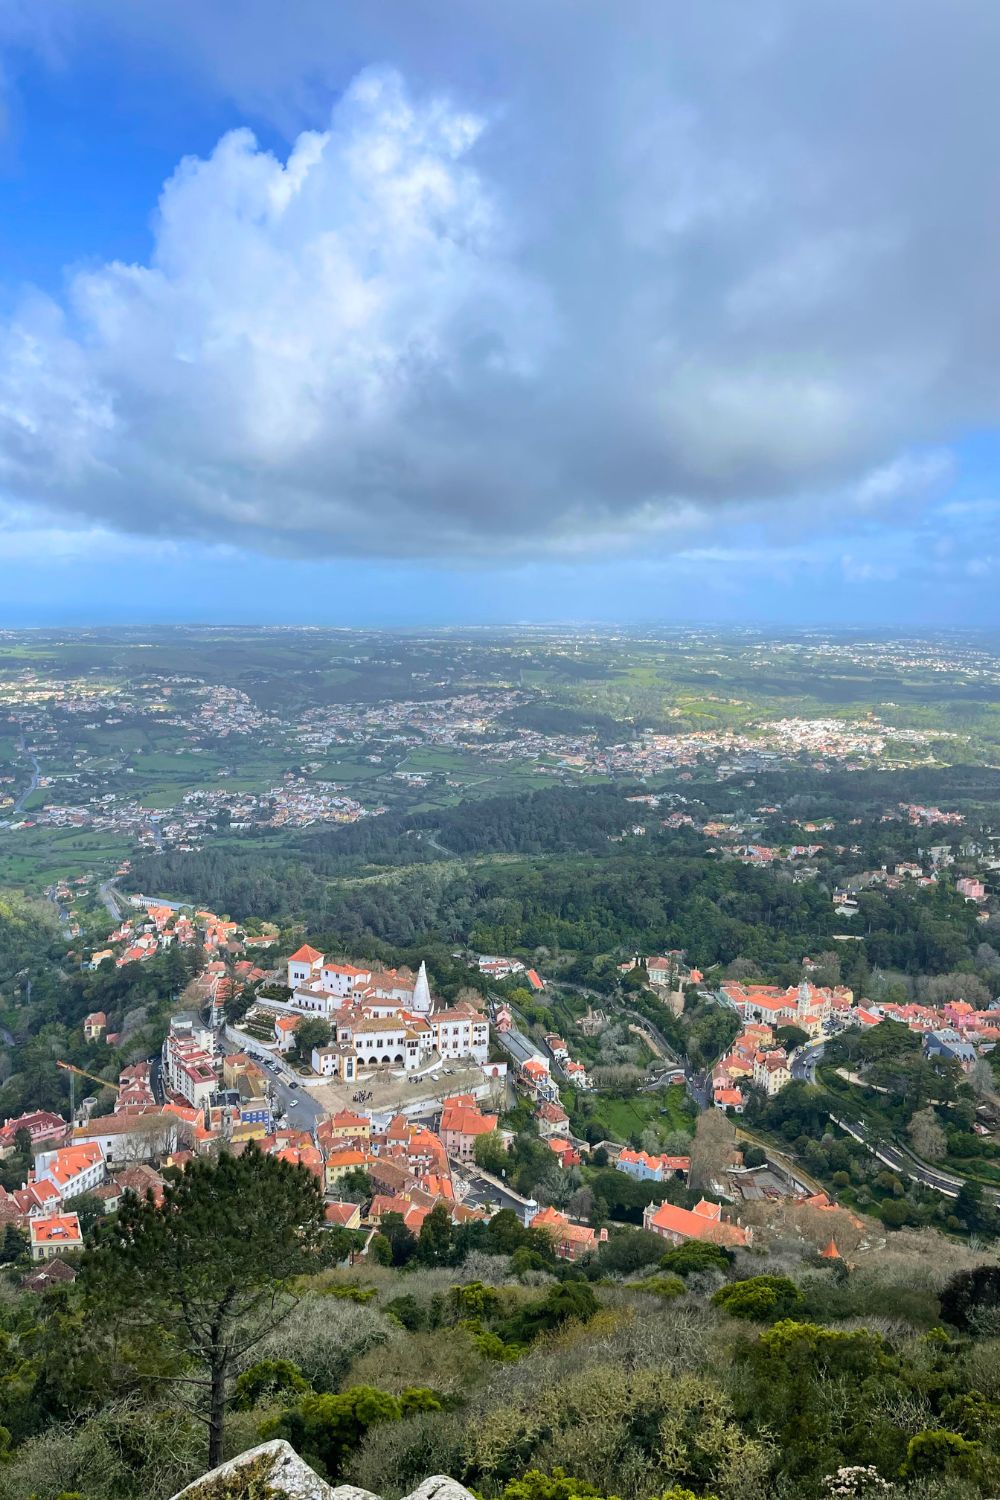 Aerial view of the historic town of Sintra, Portugal, showcasing terracotta-roofed buildings, the prominent National Palace of Sintra with its white facades and twin chimneys, surrounded by lush greenery.